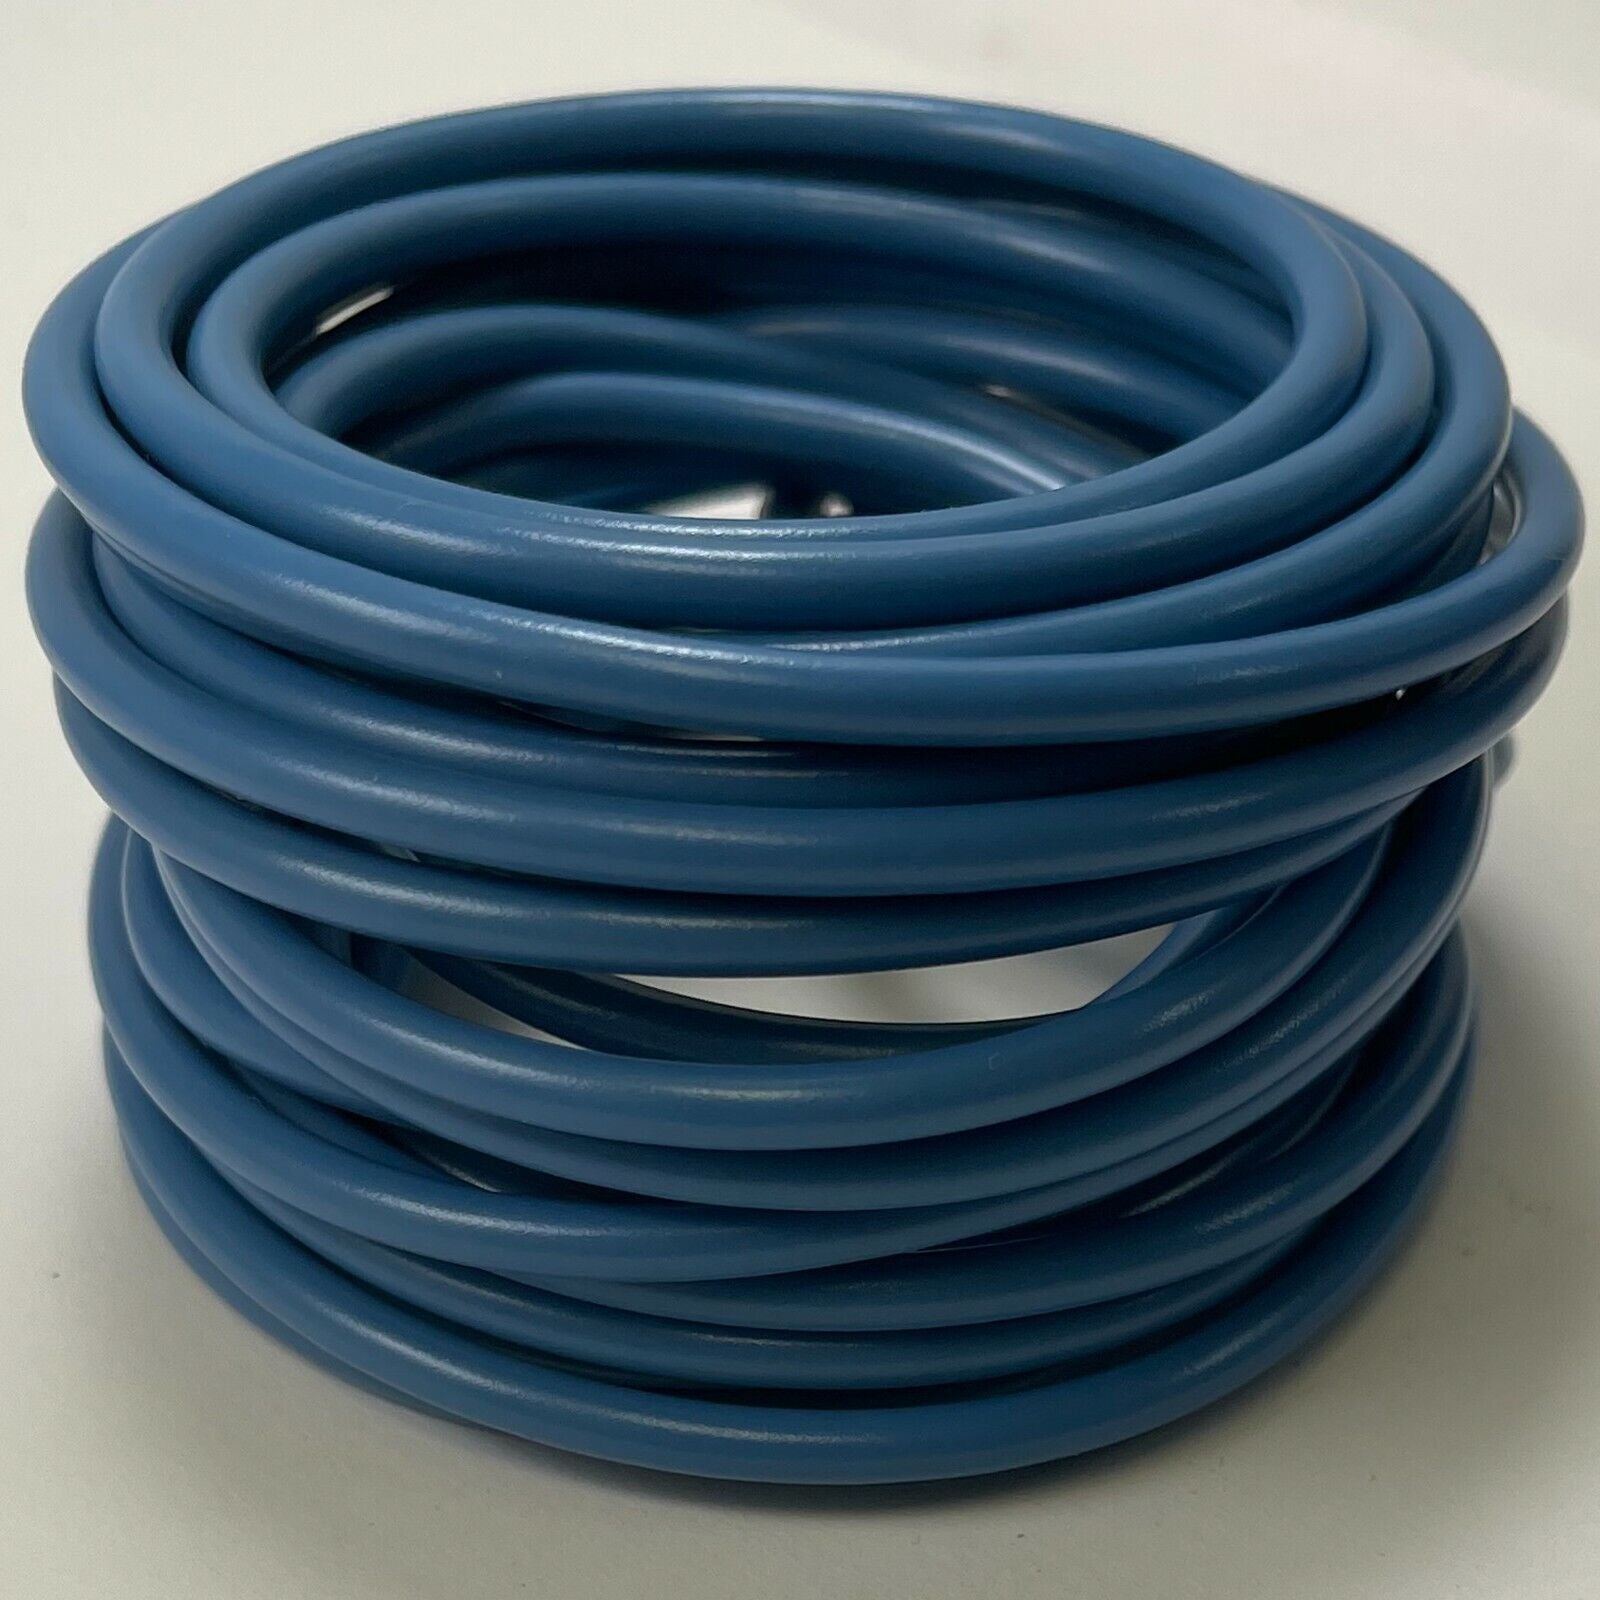 2 Pack of Automotive Primary Wire 12 Gauge 15 FT - Blue